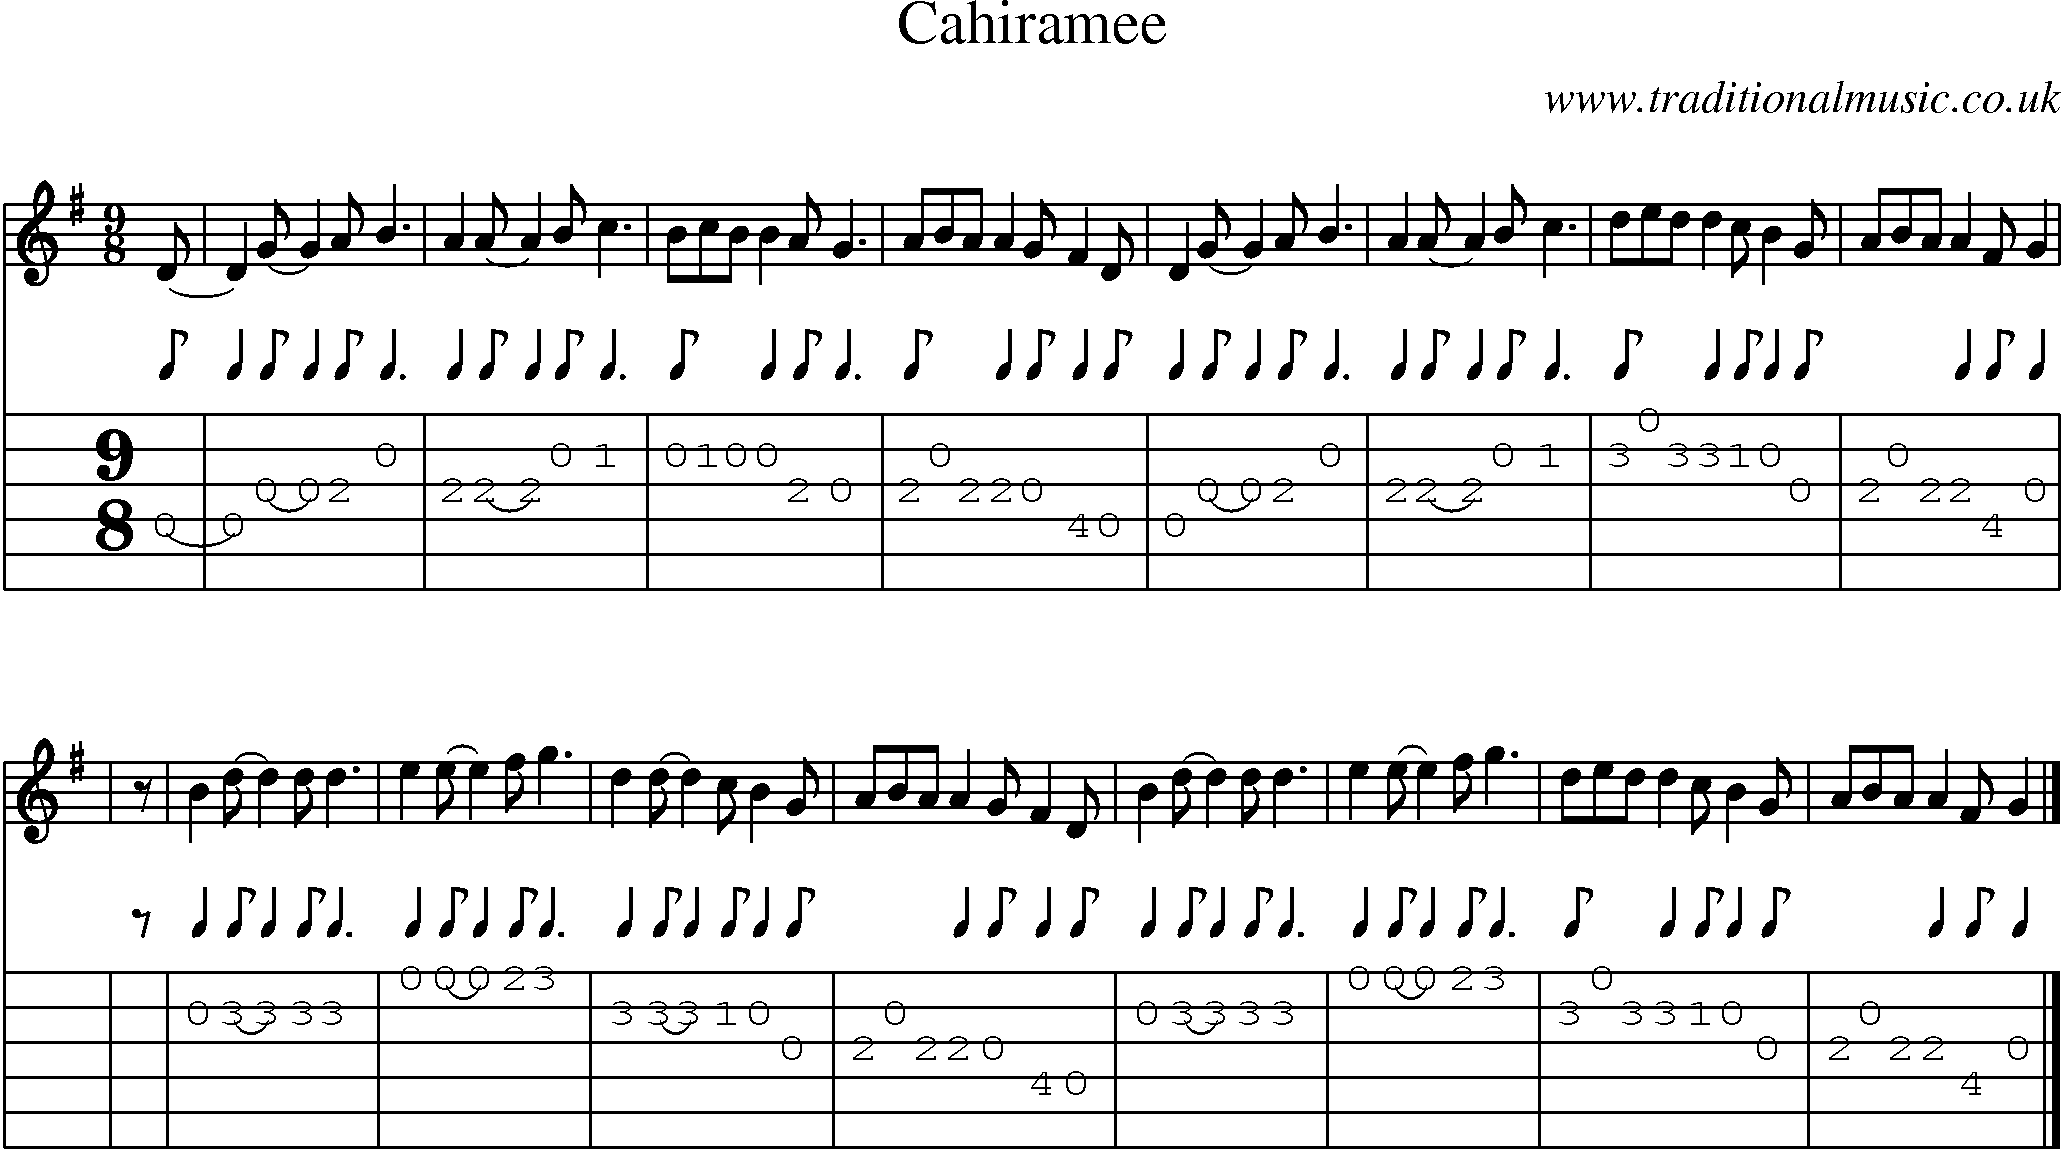 Music Score and Guitar Tabs for Cahiramee